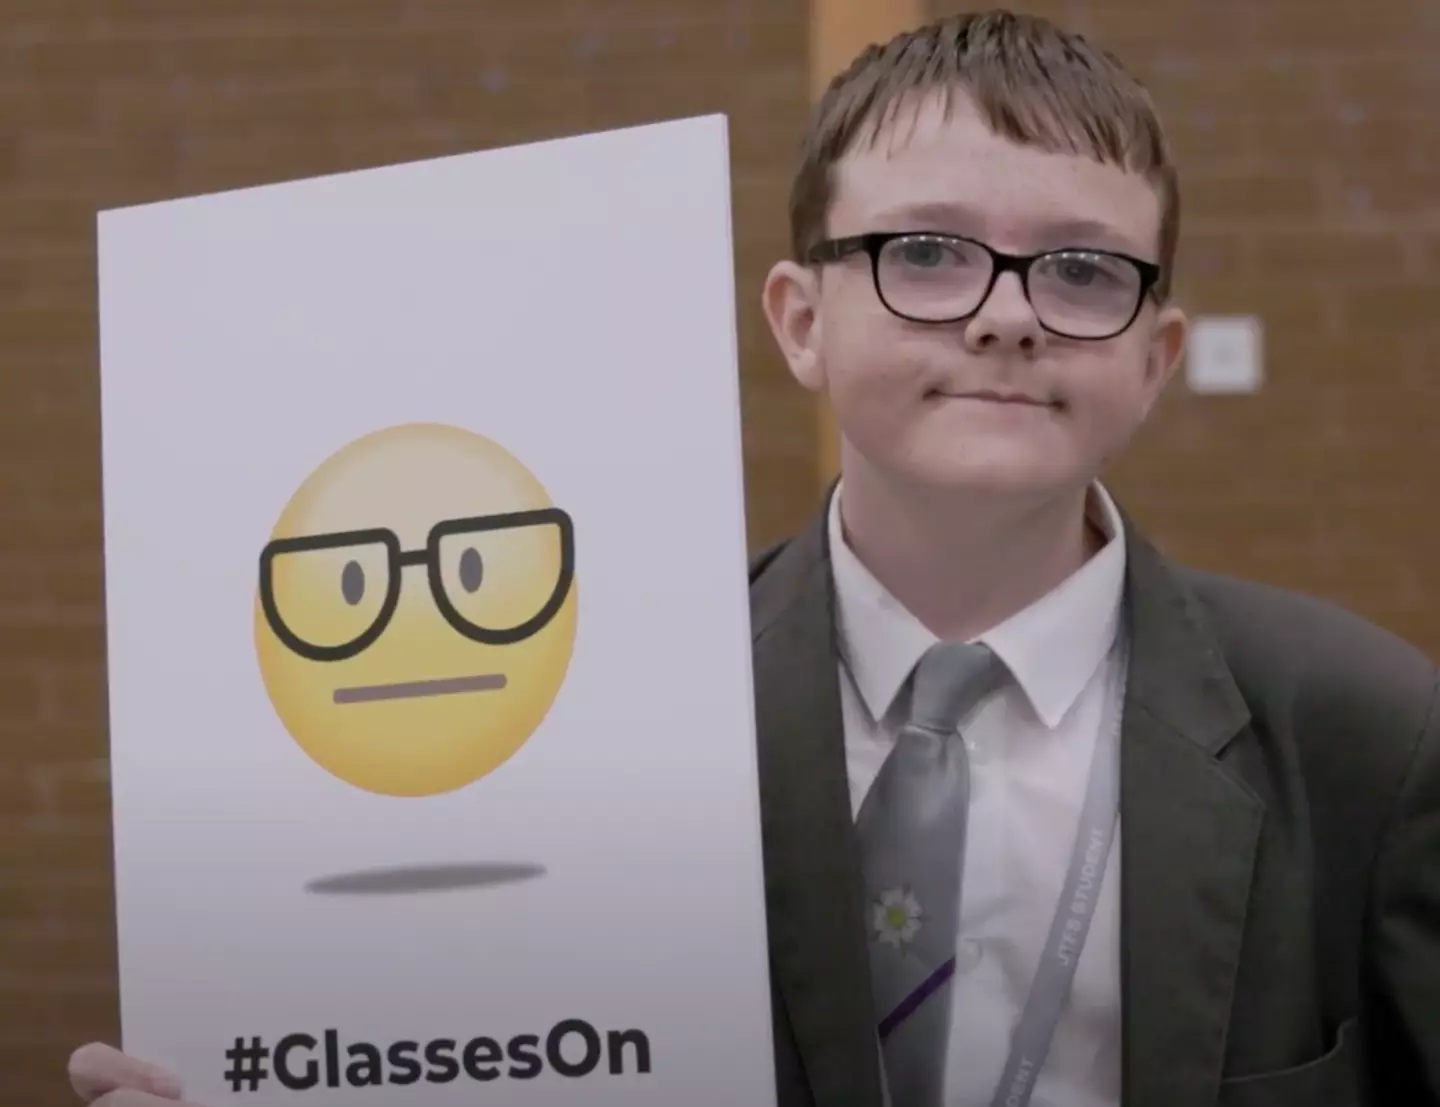 The children at the school helped Lowri by sharing some design ideas for glasses-wearing emojis.